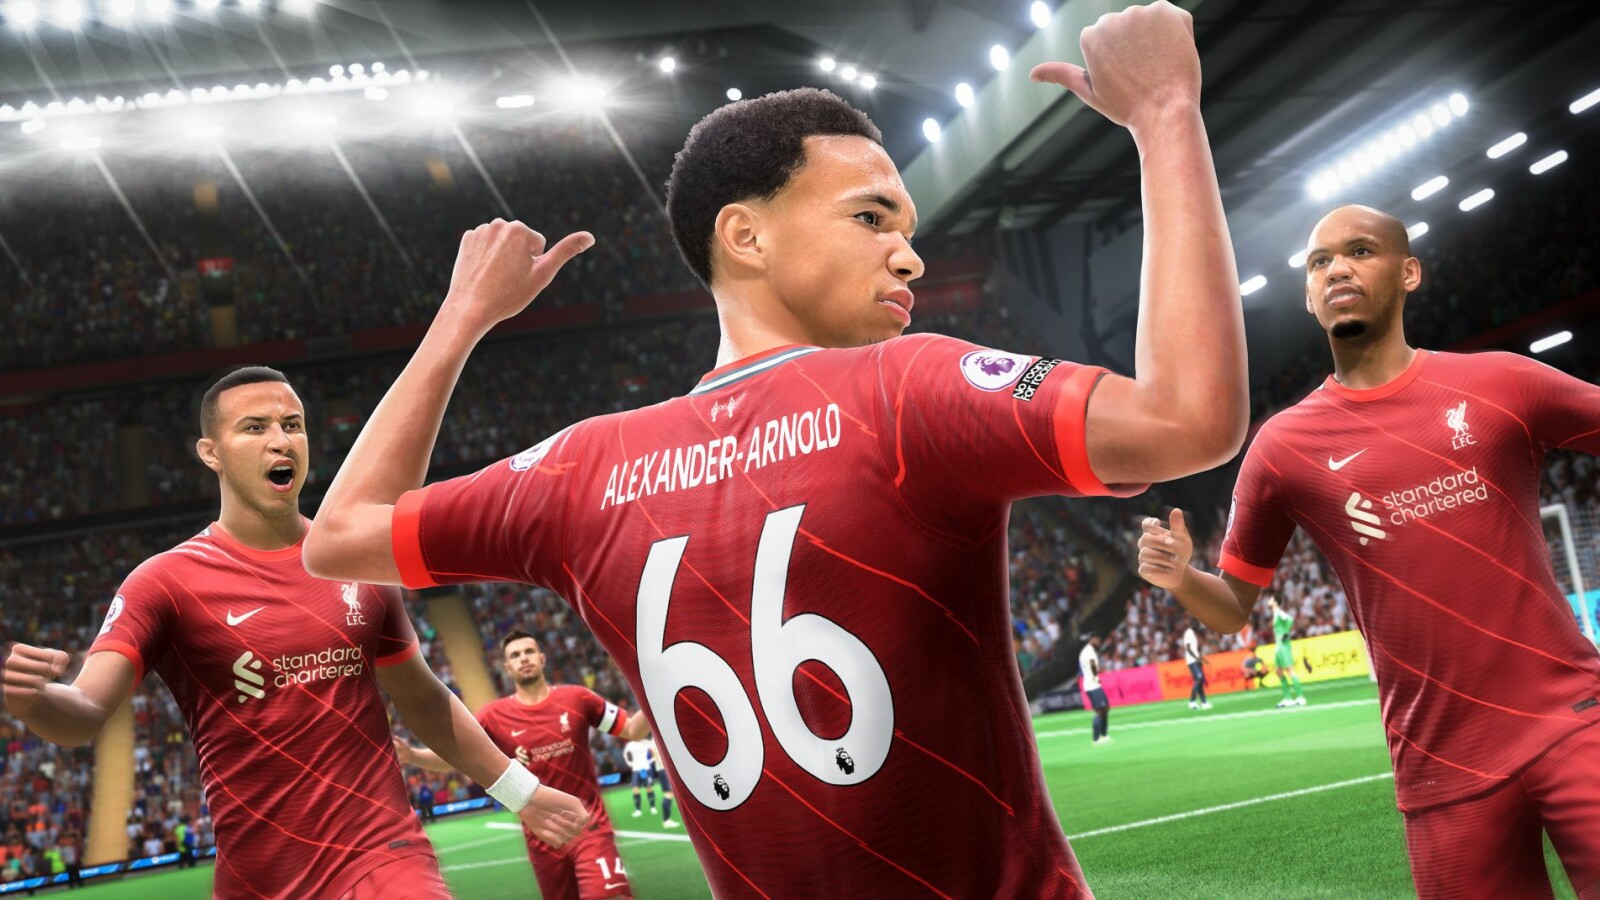 FIFA 22: EA reveals gameplay, hyper movement and AI in video